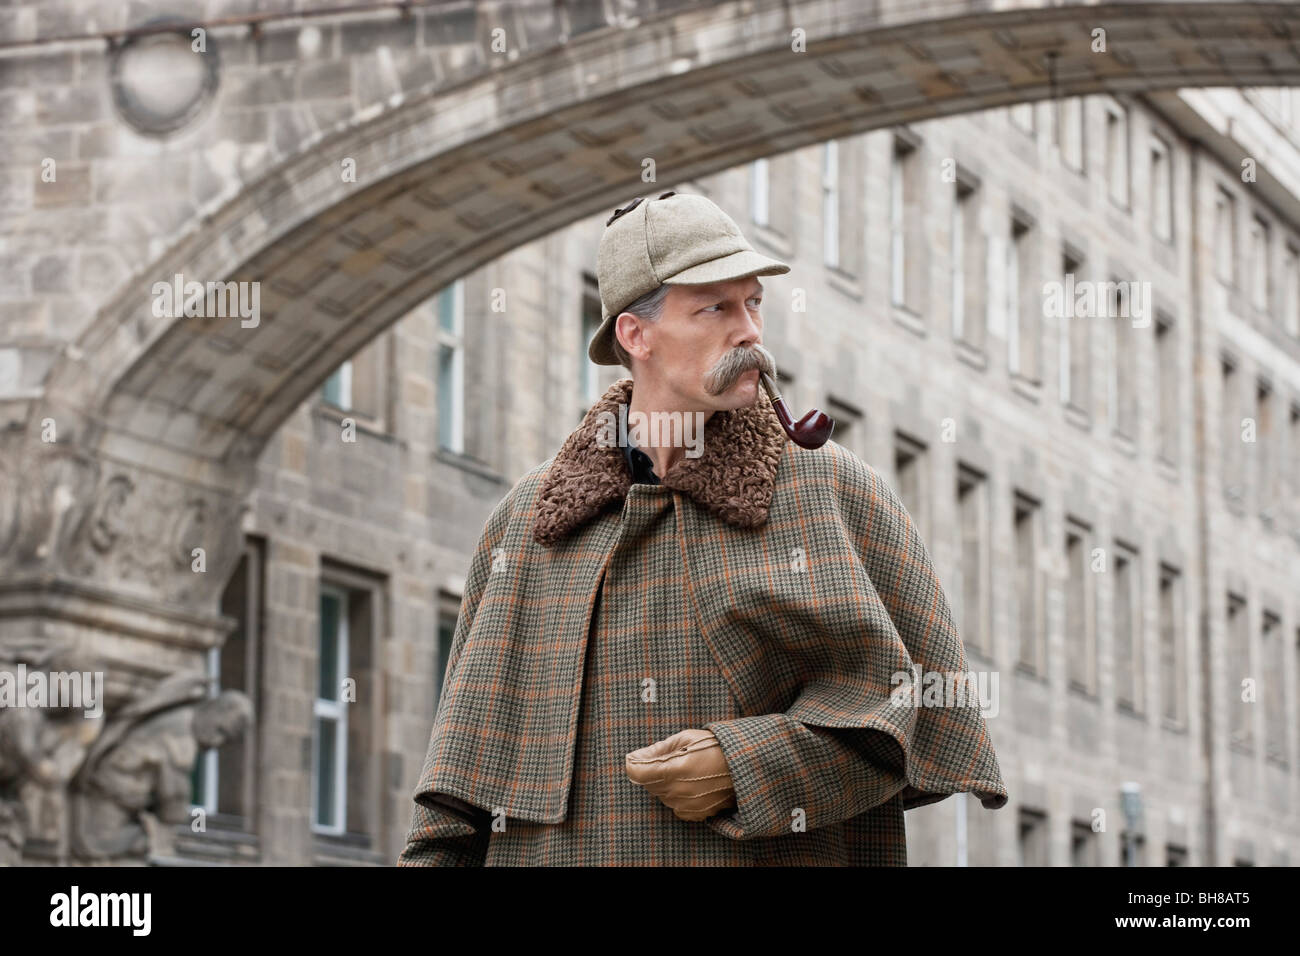 A man dressed up as Sherlock Holmes standing under a building arch looking away Stock Photo